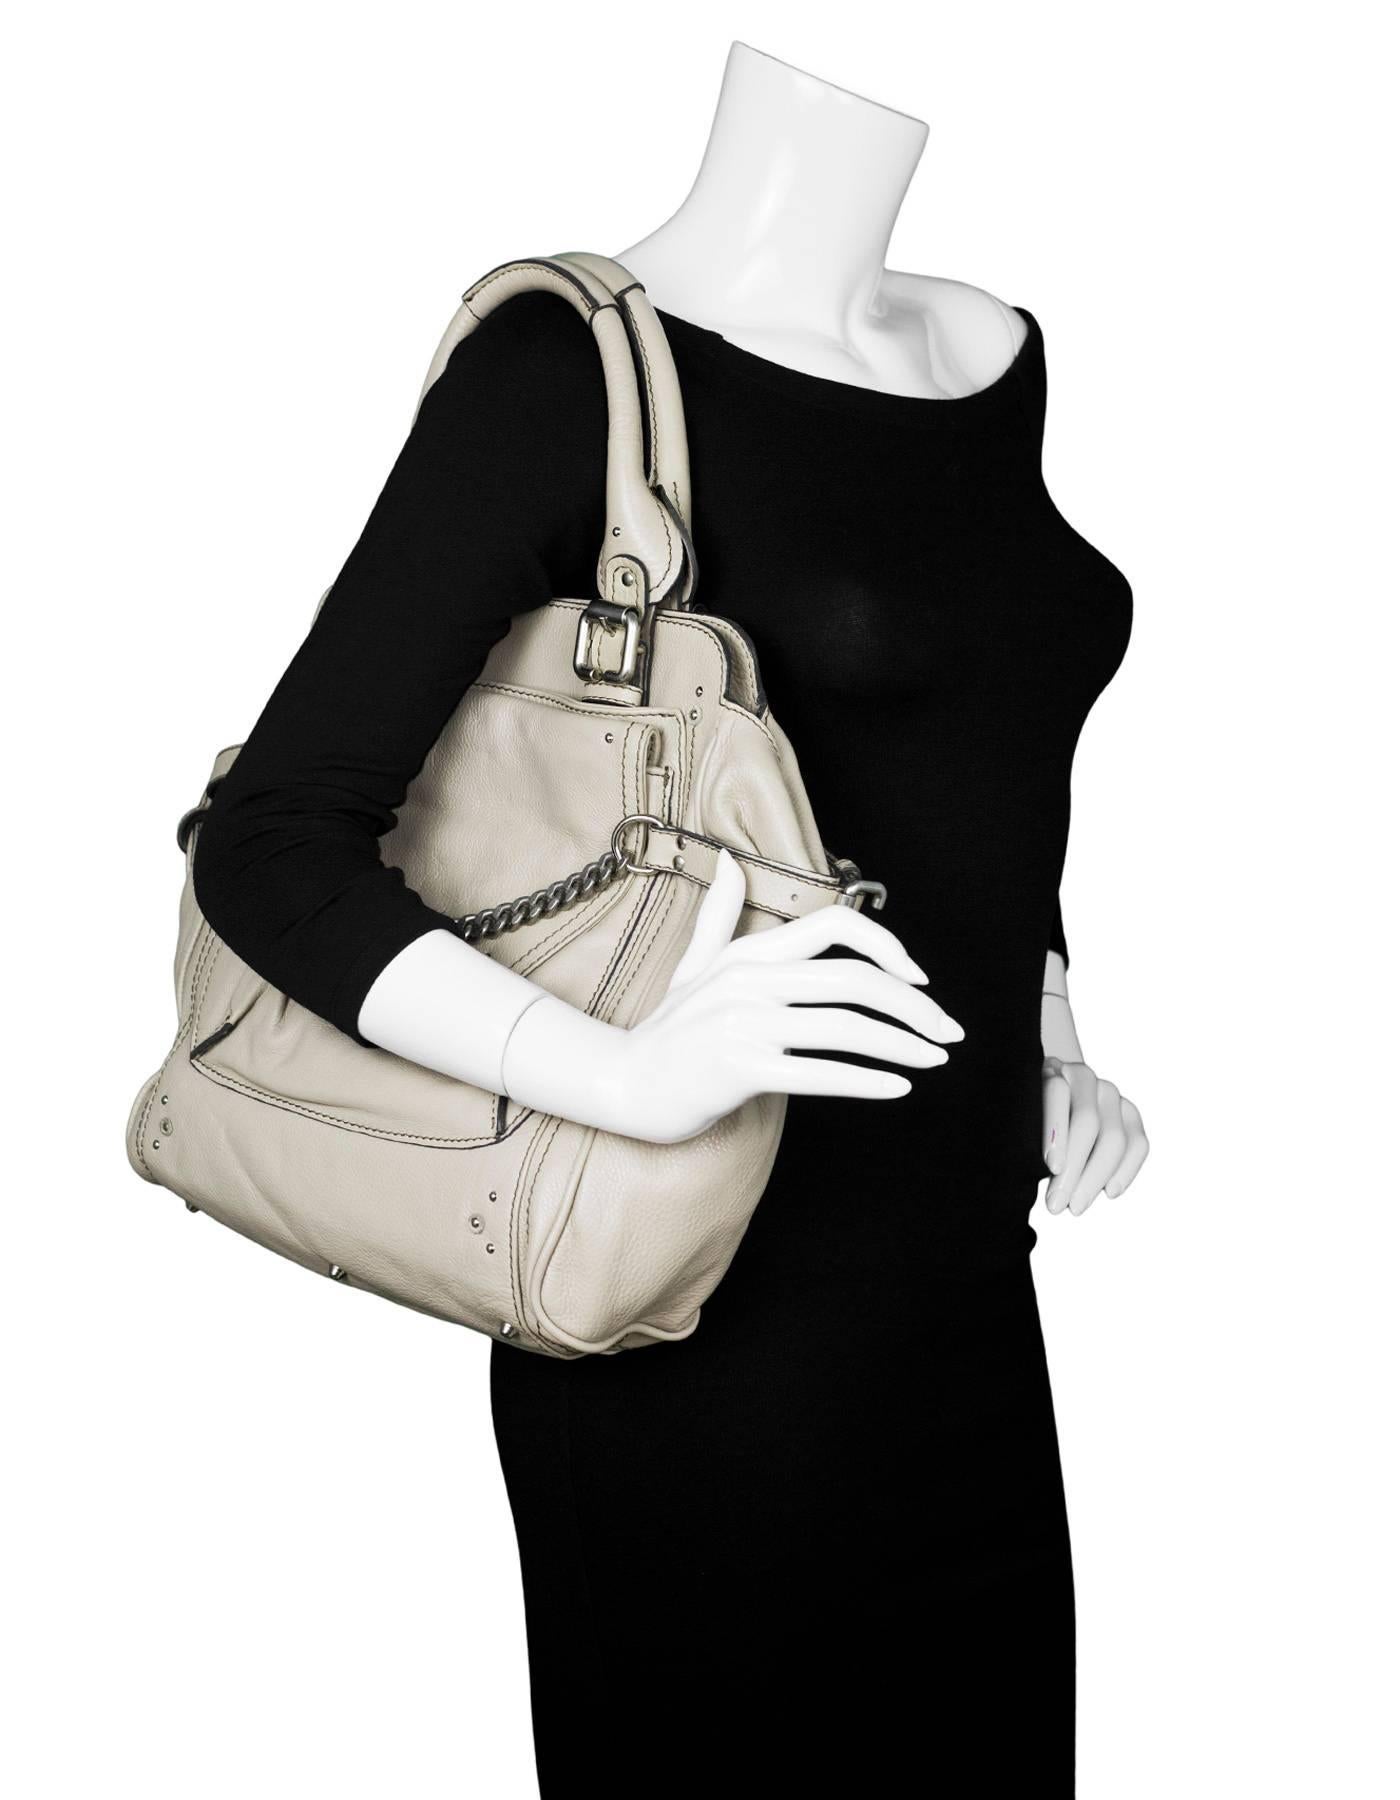 Chloe Beige Leather Large Paddington Capsule Tote

Made In: Italy
Color: Beige
Hardware: Silvertone
Materials: Leather, metal
Lining: Cream textile
Closure/Opening: Open top with magnetic closure
Exterior Pockets: Pocket at back, pocket and flap